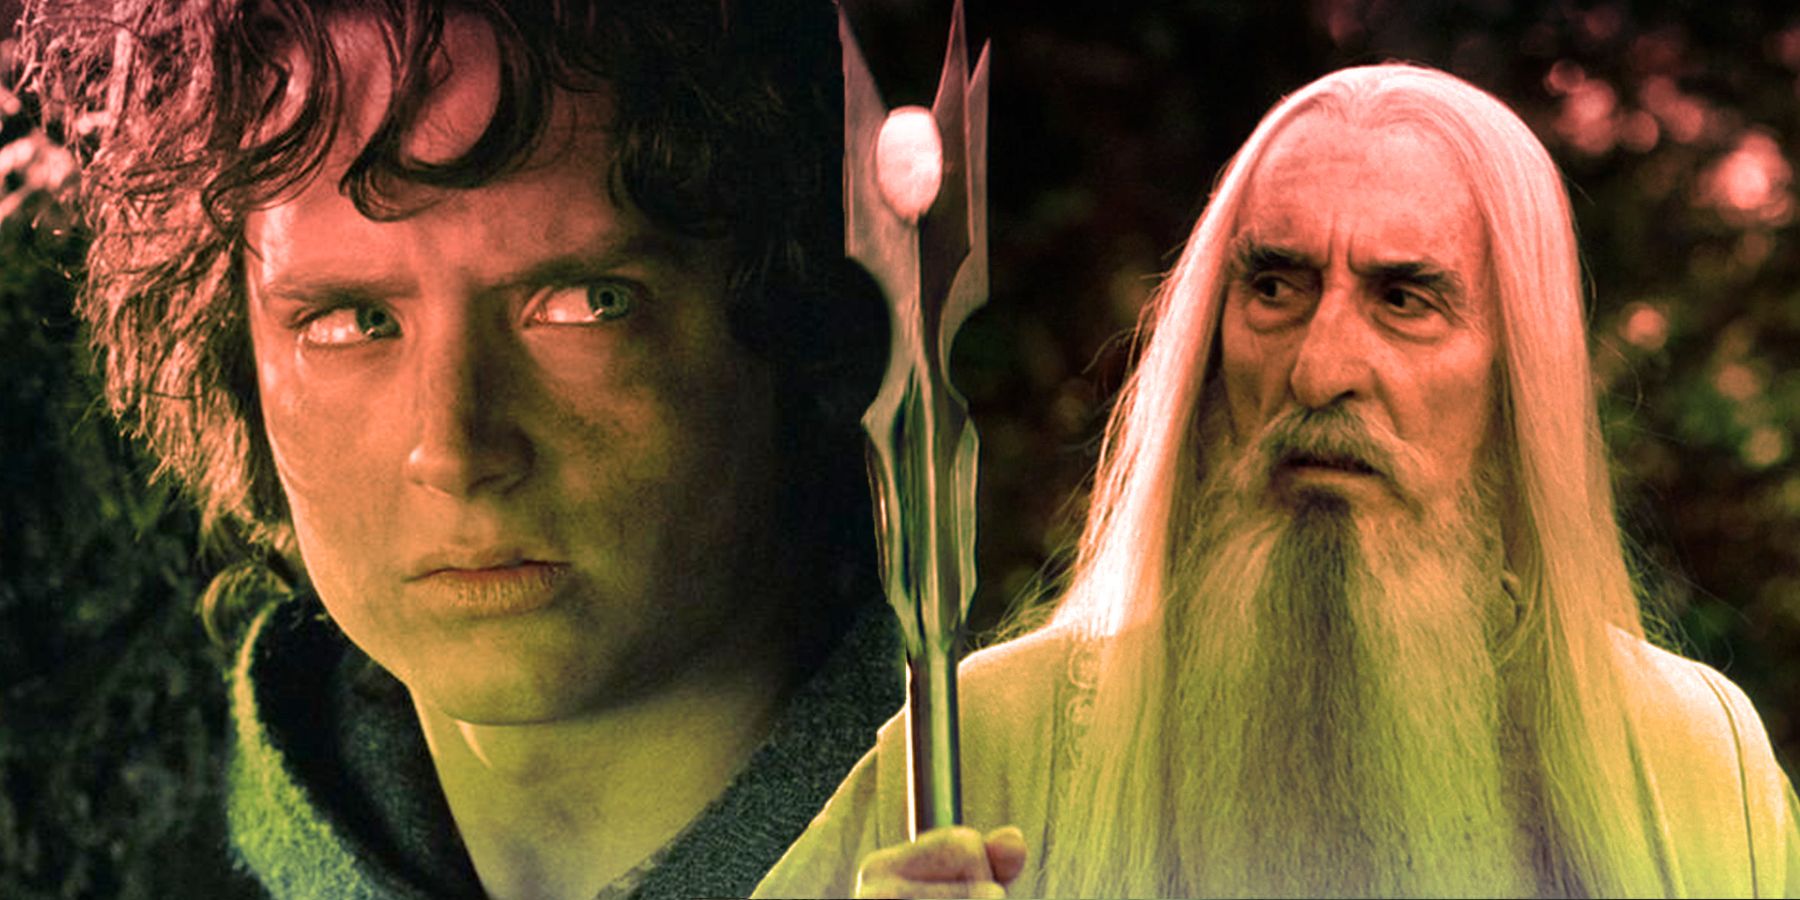 10 Harsh Realities Of Rewatching The Lord Of The Rings